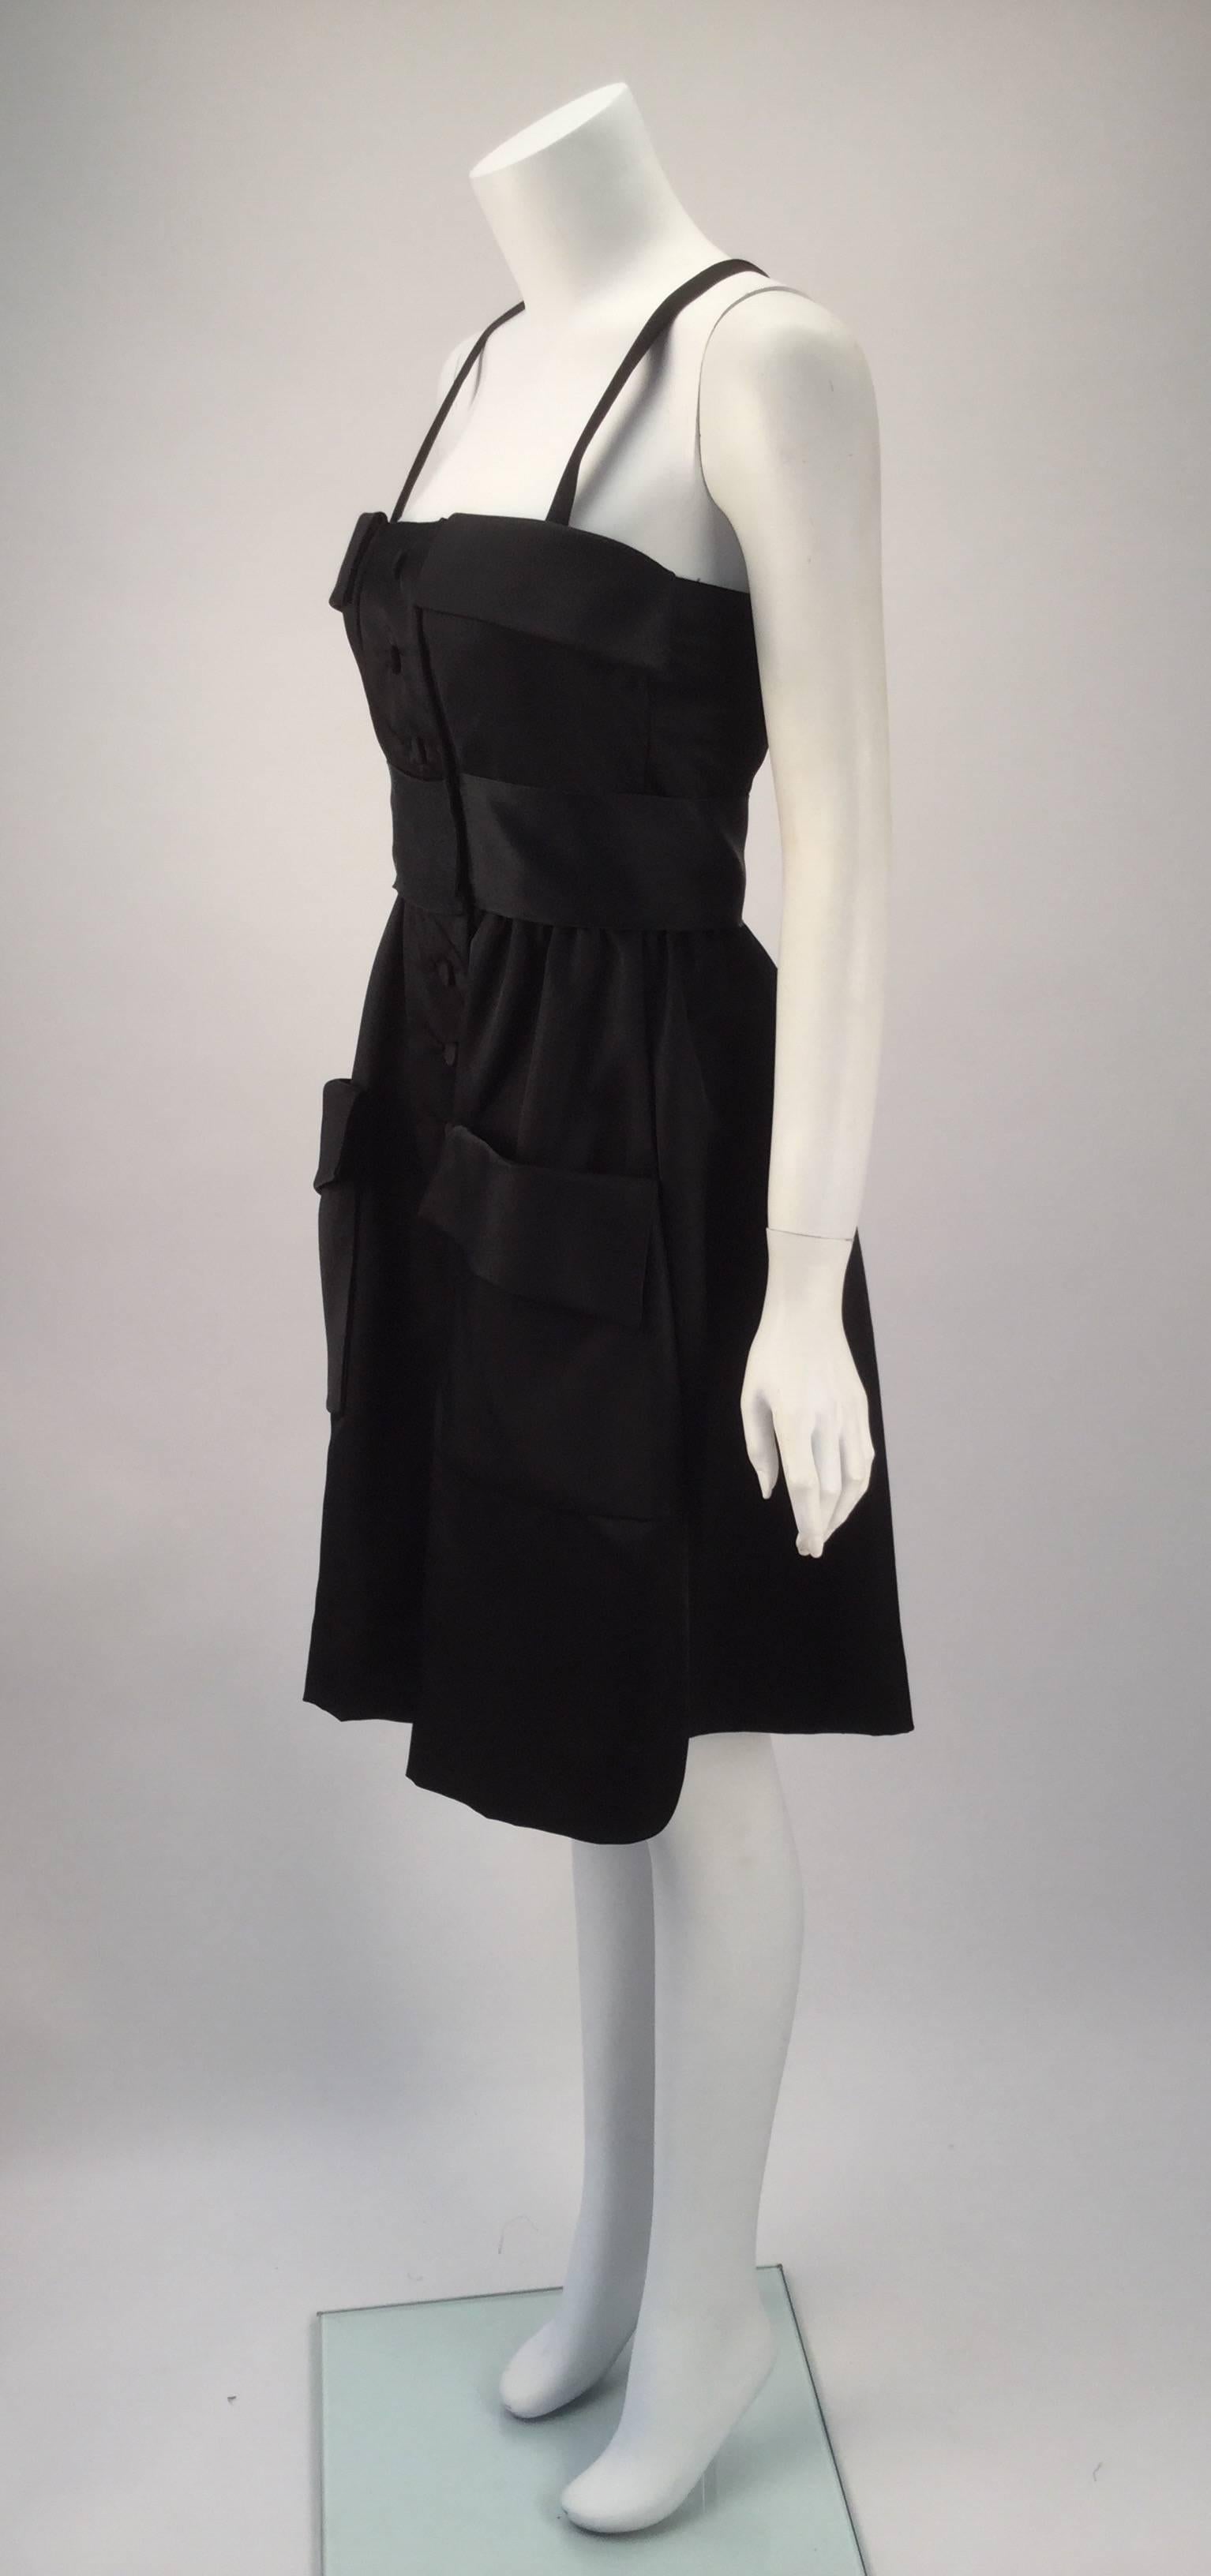 Geoffrey Beene Black Satin Dress with Pockets, 1970s  In Excellent Condition For Sale In Houston, TX